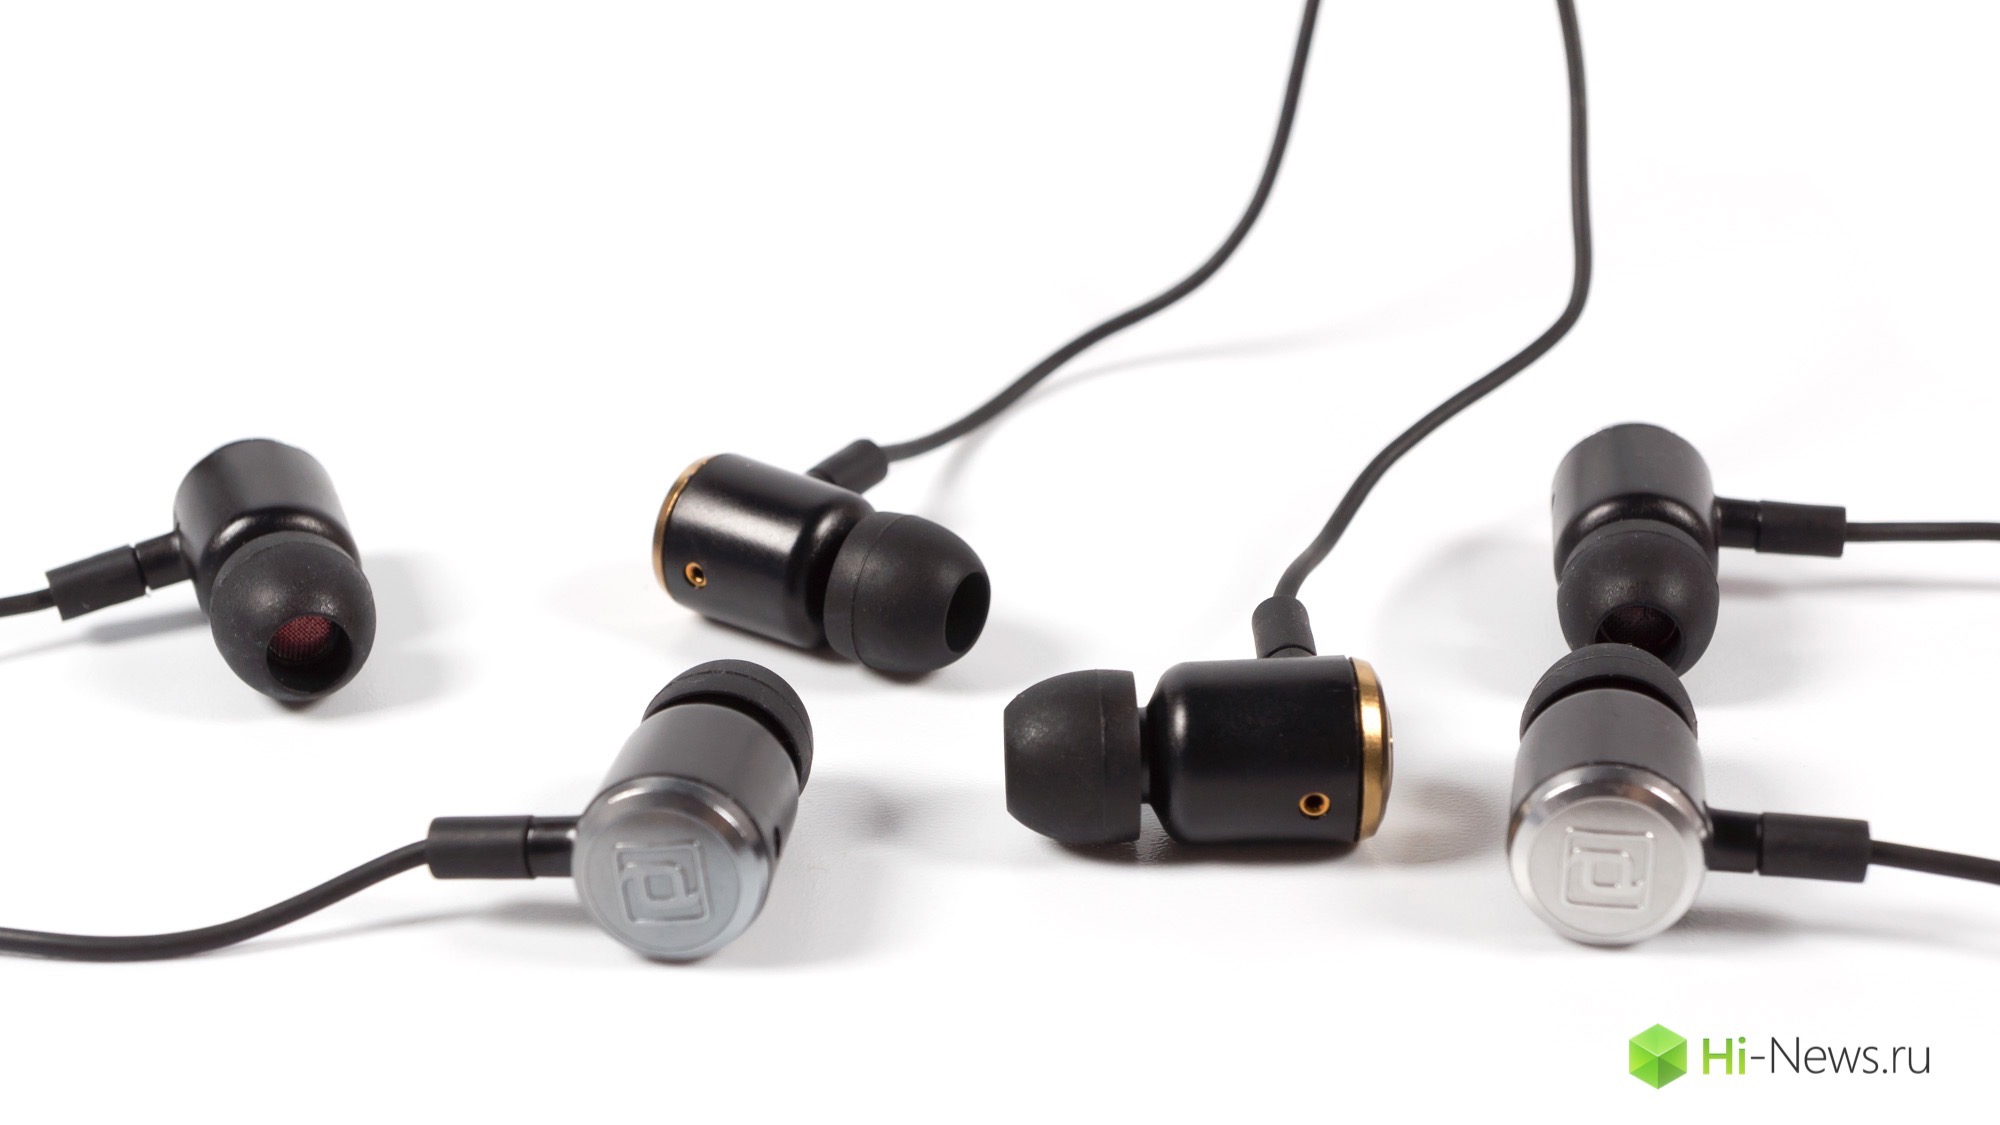 The Periodic Audio headphones review — a rigorous scientific approach